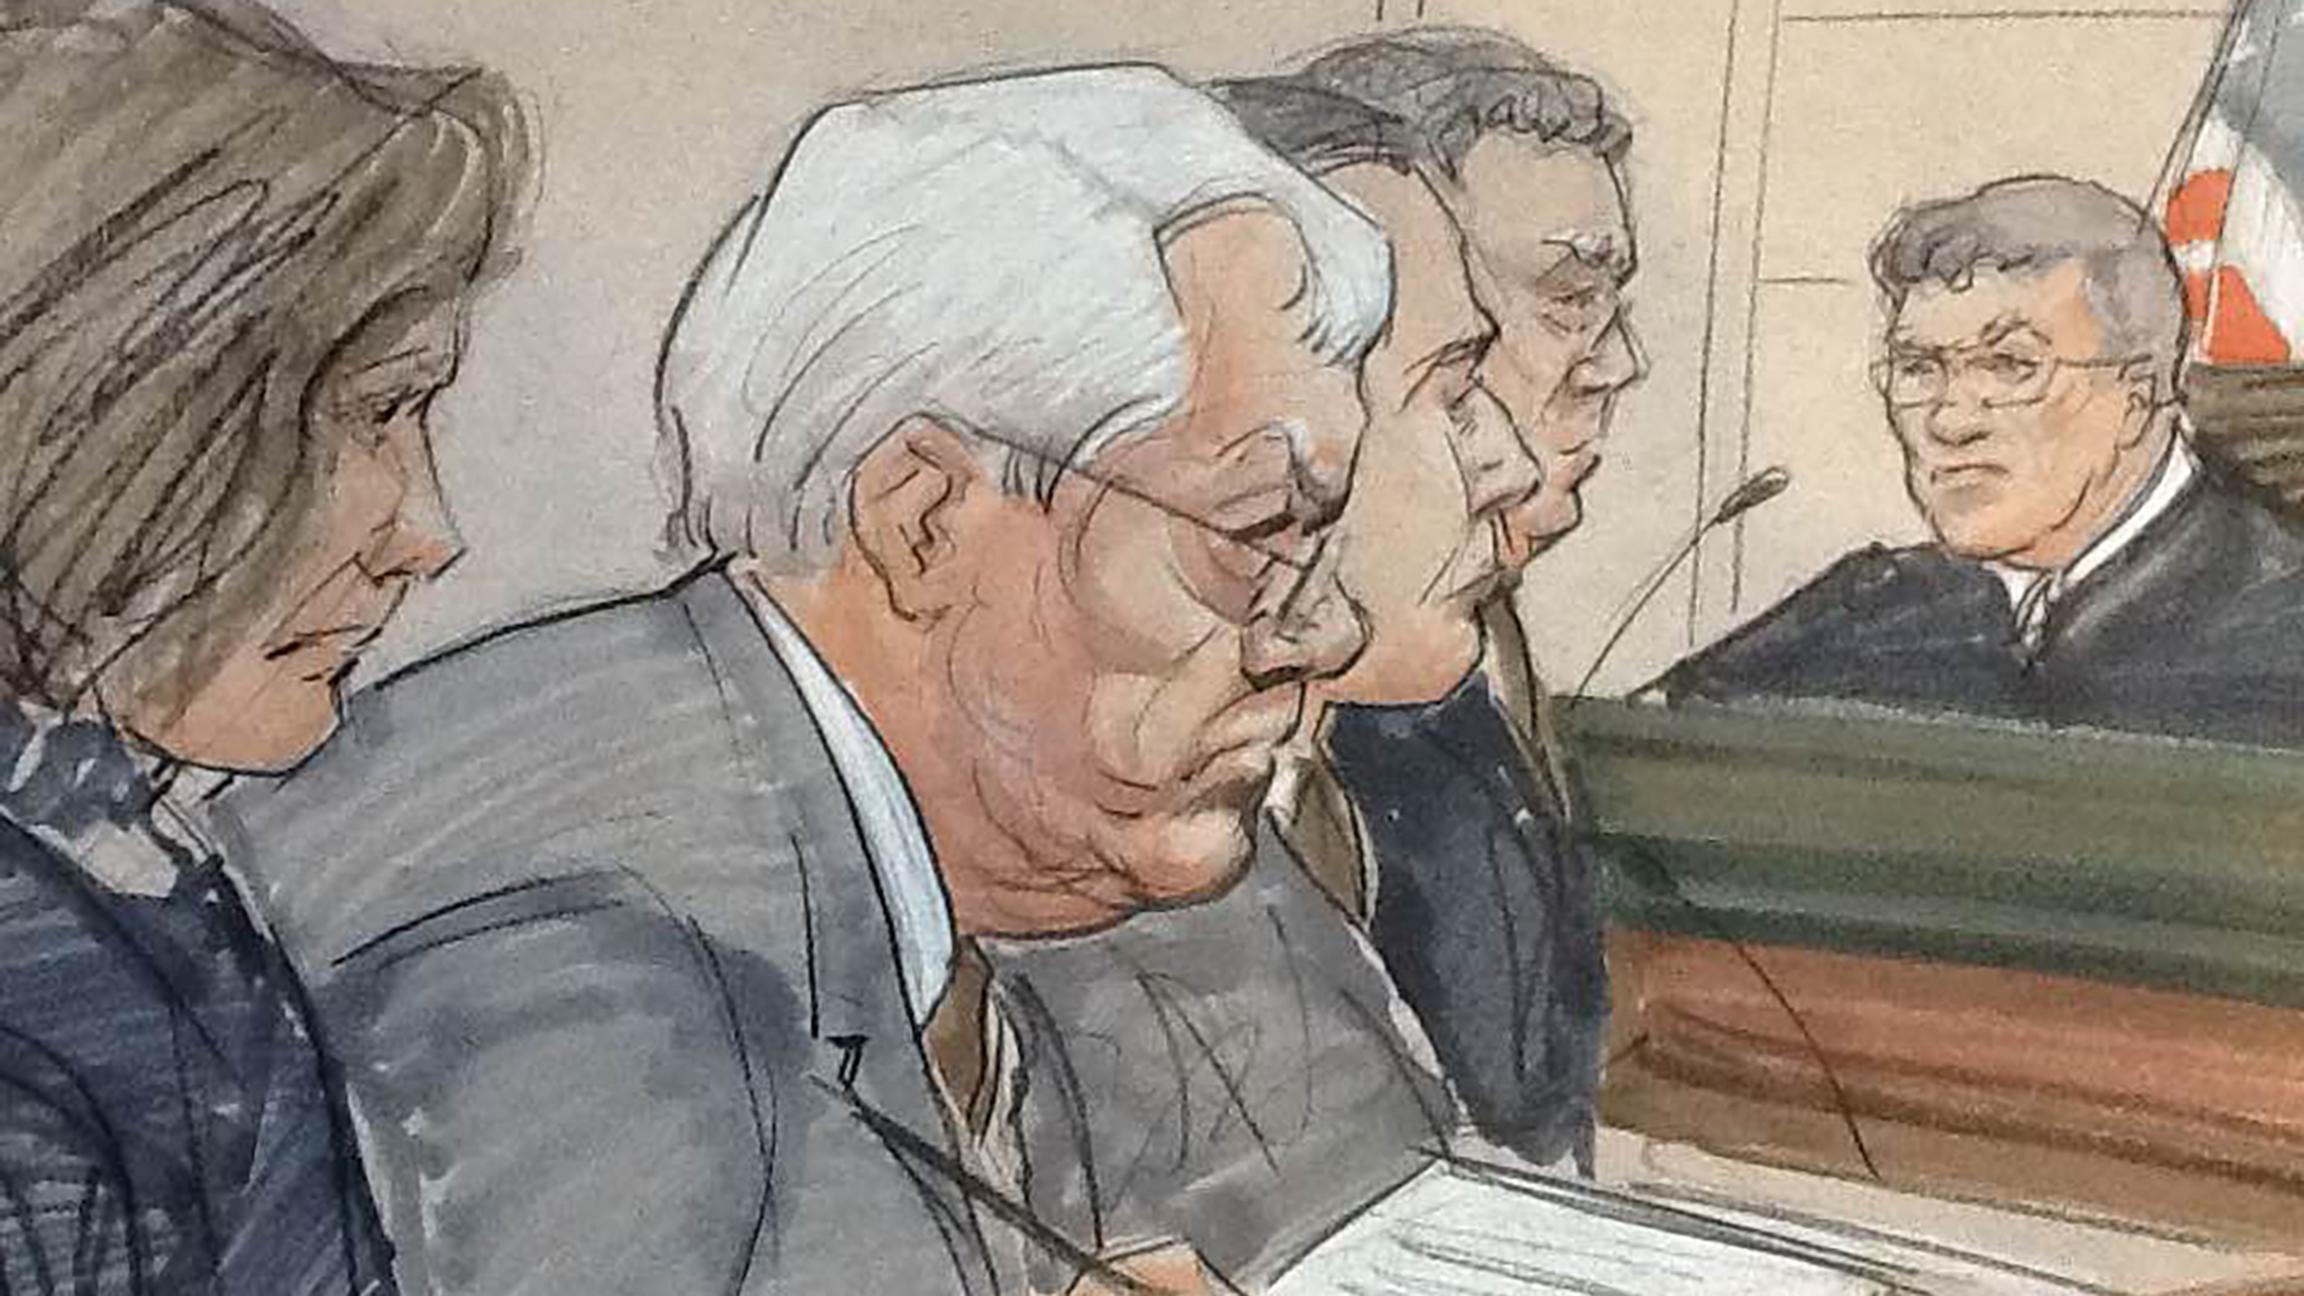 (Courtroom sketch by Thomas Gianni)